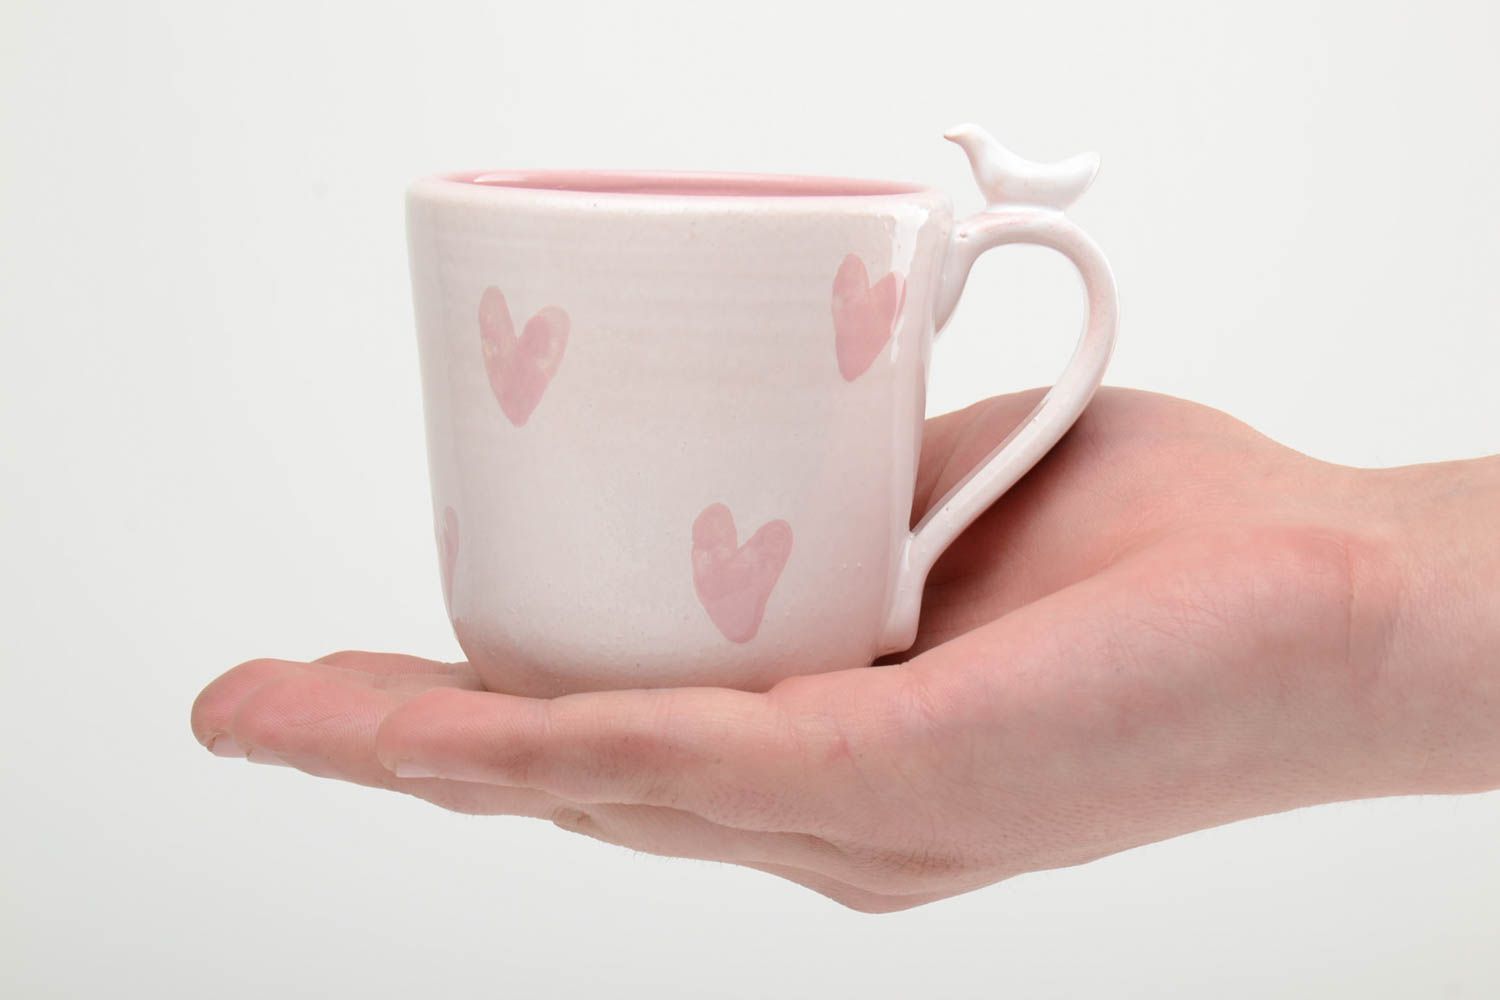 10 oz pink glaze ceramic cup with hearts pattern and bird on the handle photo 5